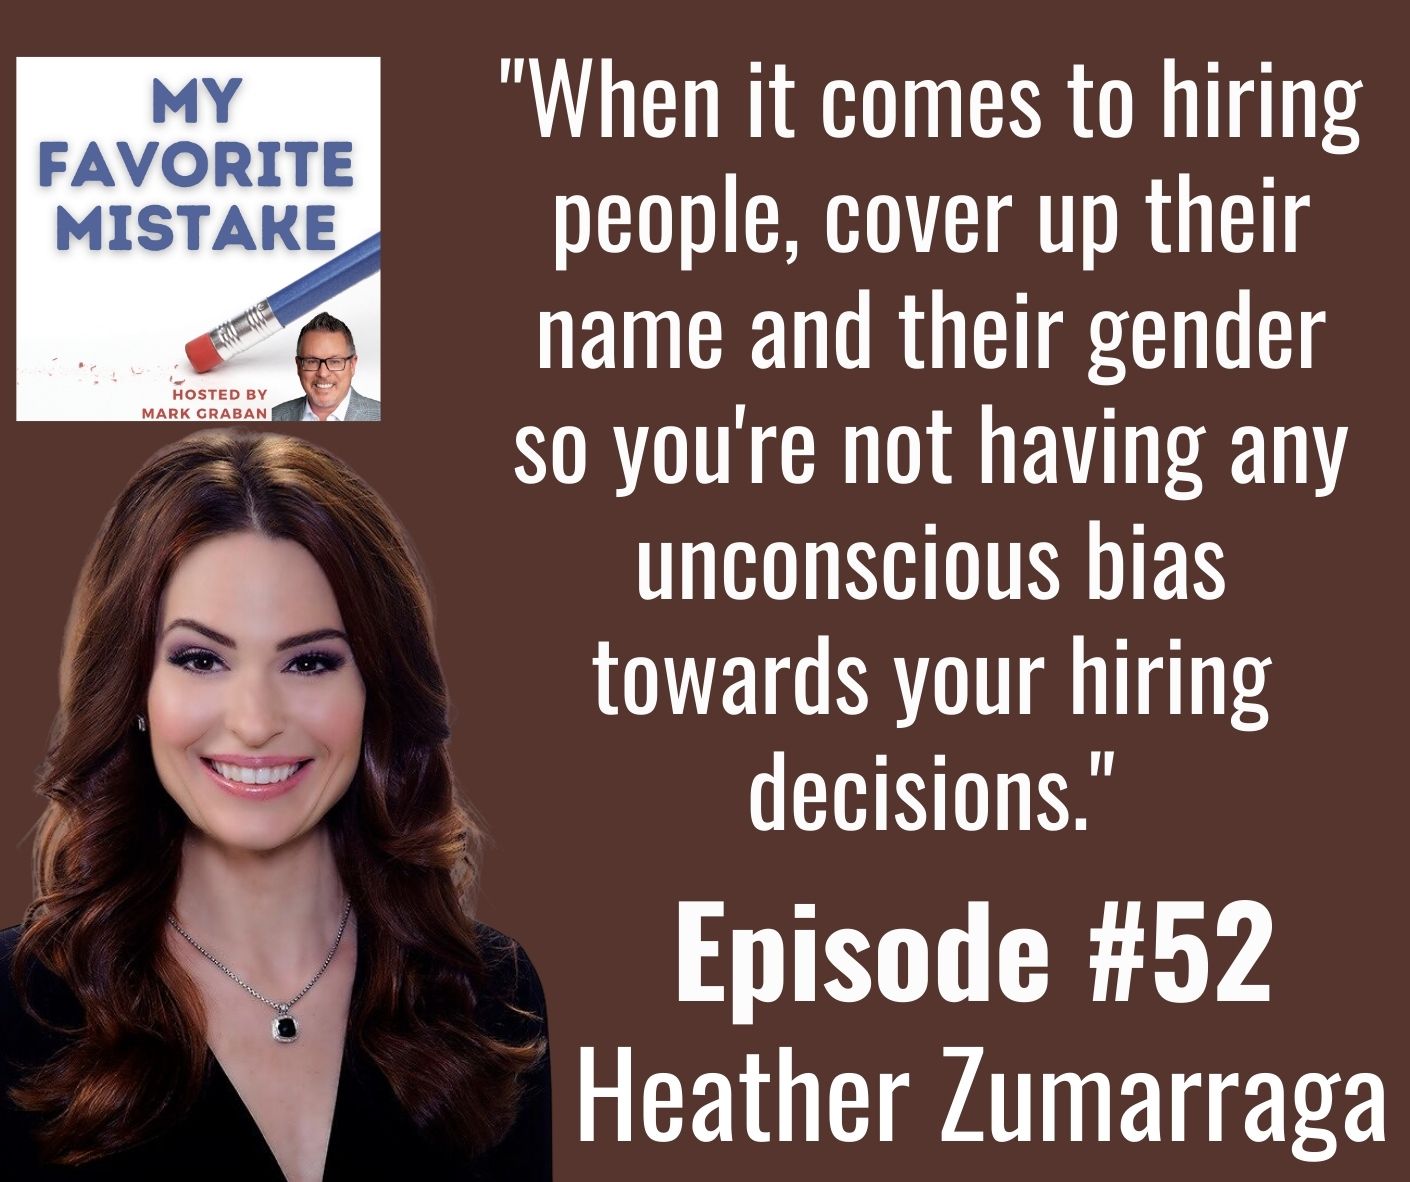 "When it comes to hiring people, cover up their name and their gender so you're not having any unconscious bias towards your hiring decisions."